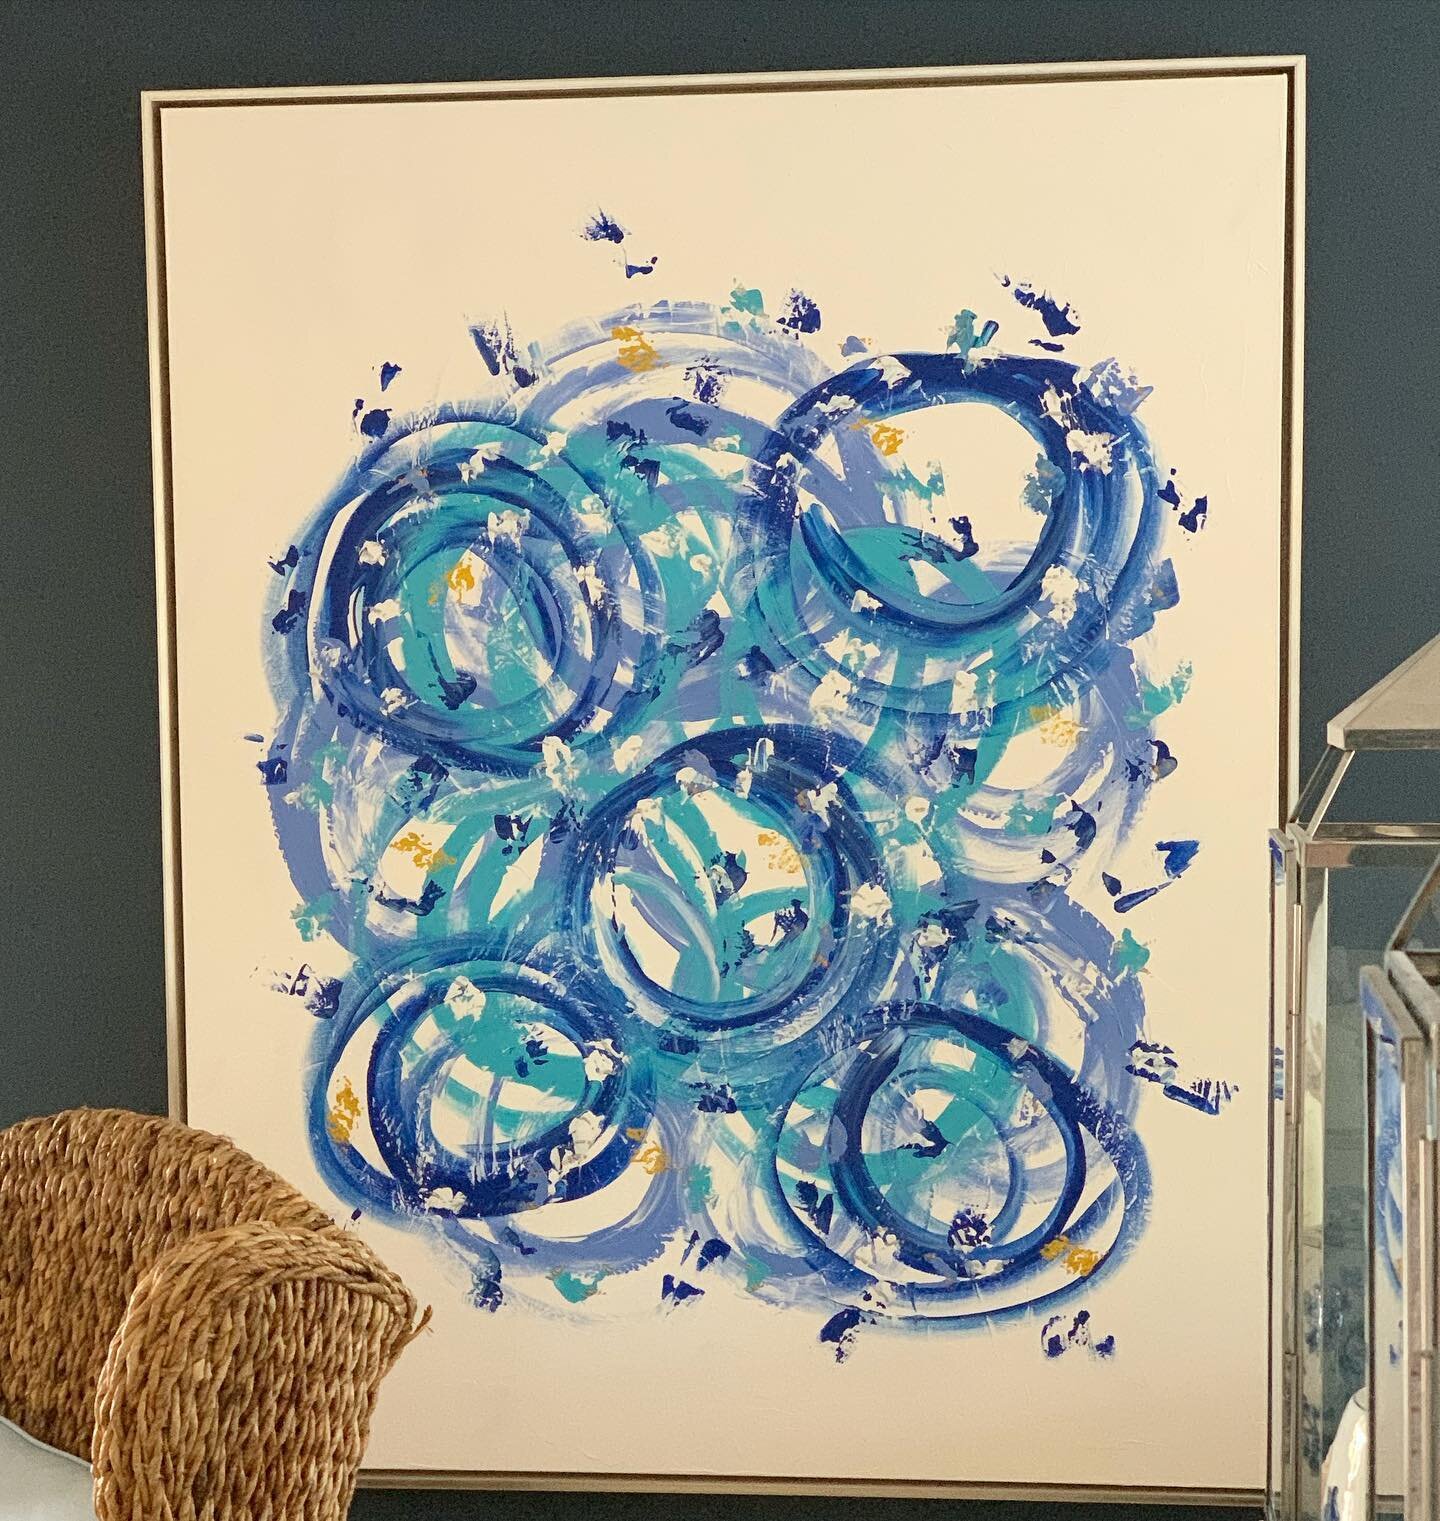 &lsquo;You Blue My Mind&rsquo; 48x60 found it&rsquo;s perfect home. 💙 
.
.
.
#commission #commissionedart #abstractart #abstractpainting #abstractartist #abstractexpressionism #acryliconcanvas #homesweethome #mmfineart #blue